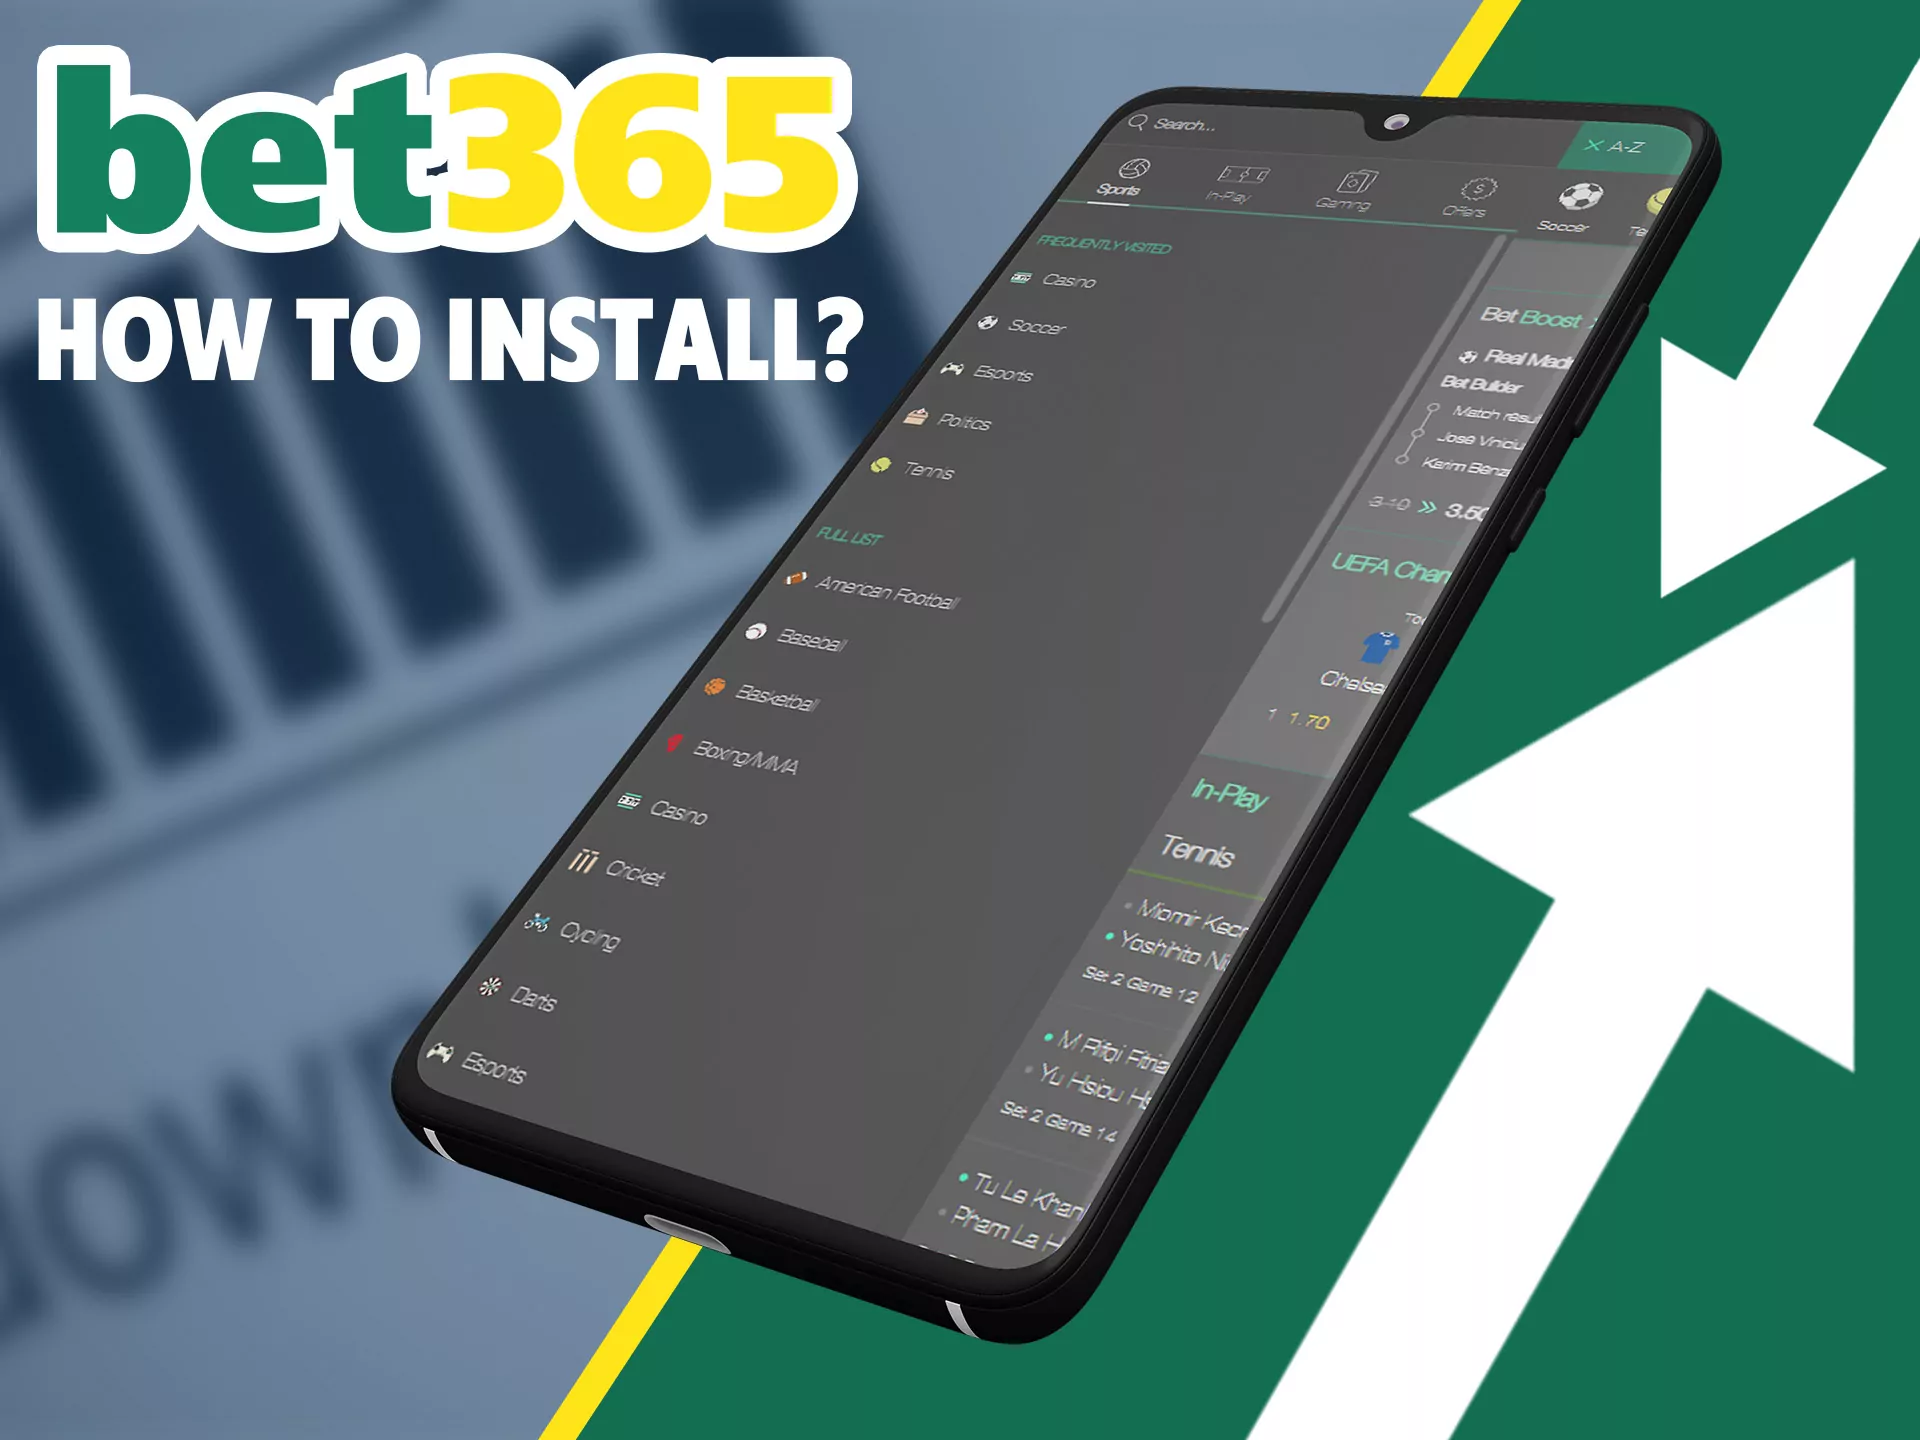 Installation of Bet365 app is very easy.